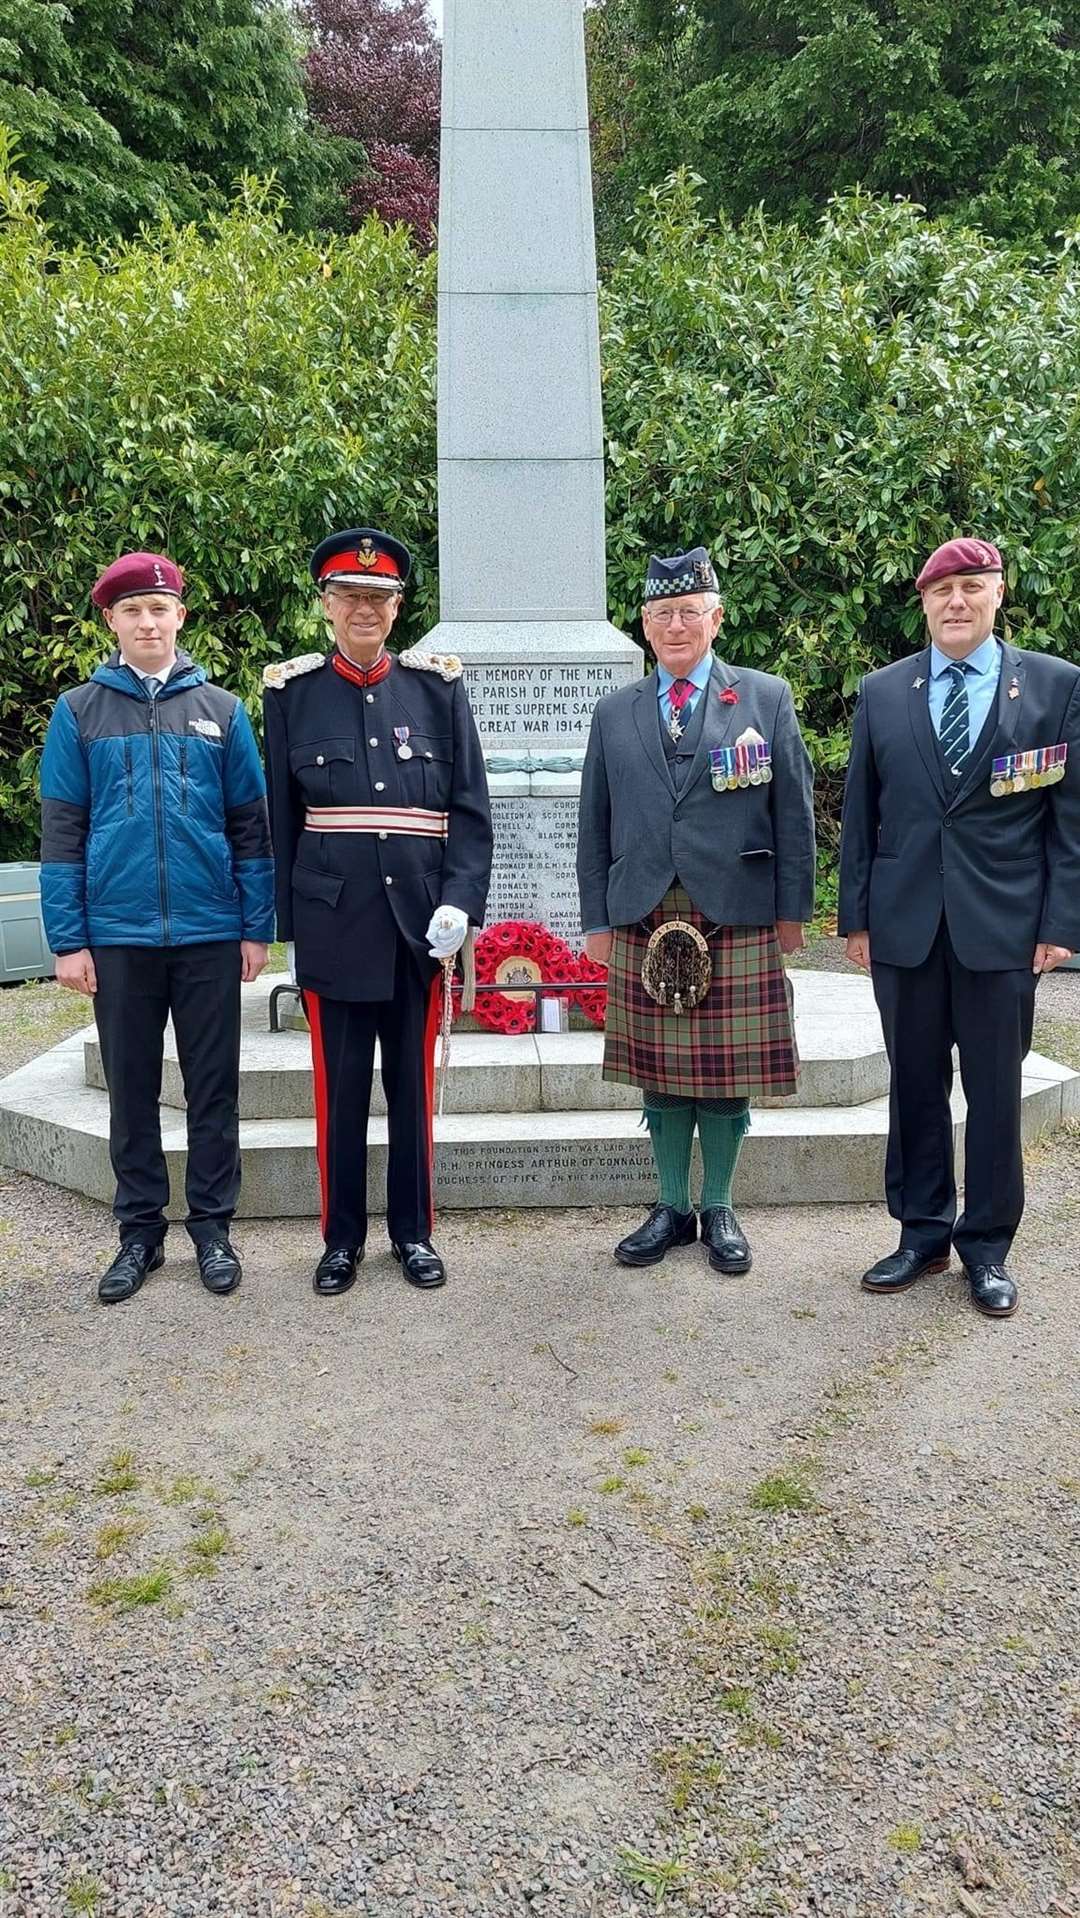 (From left) Jack Granitza, Lord Lieutenant of Banffshire Andrew Simpson, Lieutenant General Sir Alistair Irwin and Alastair Combe by the fresh wreaths.